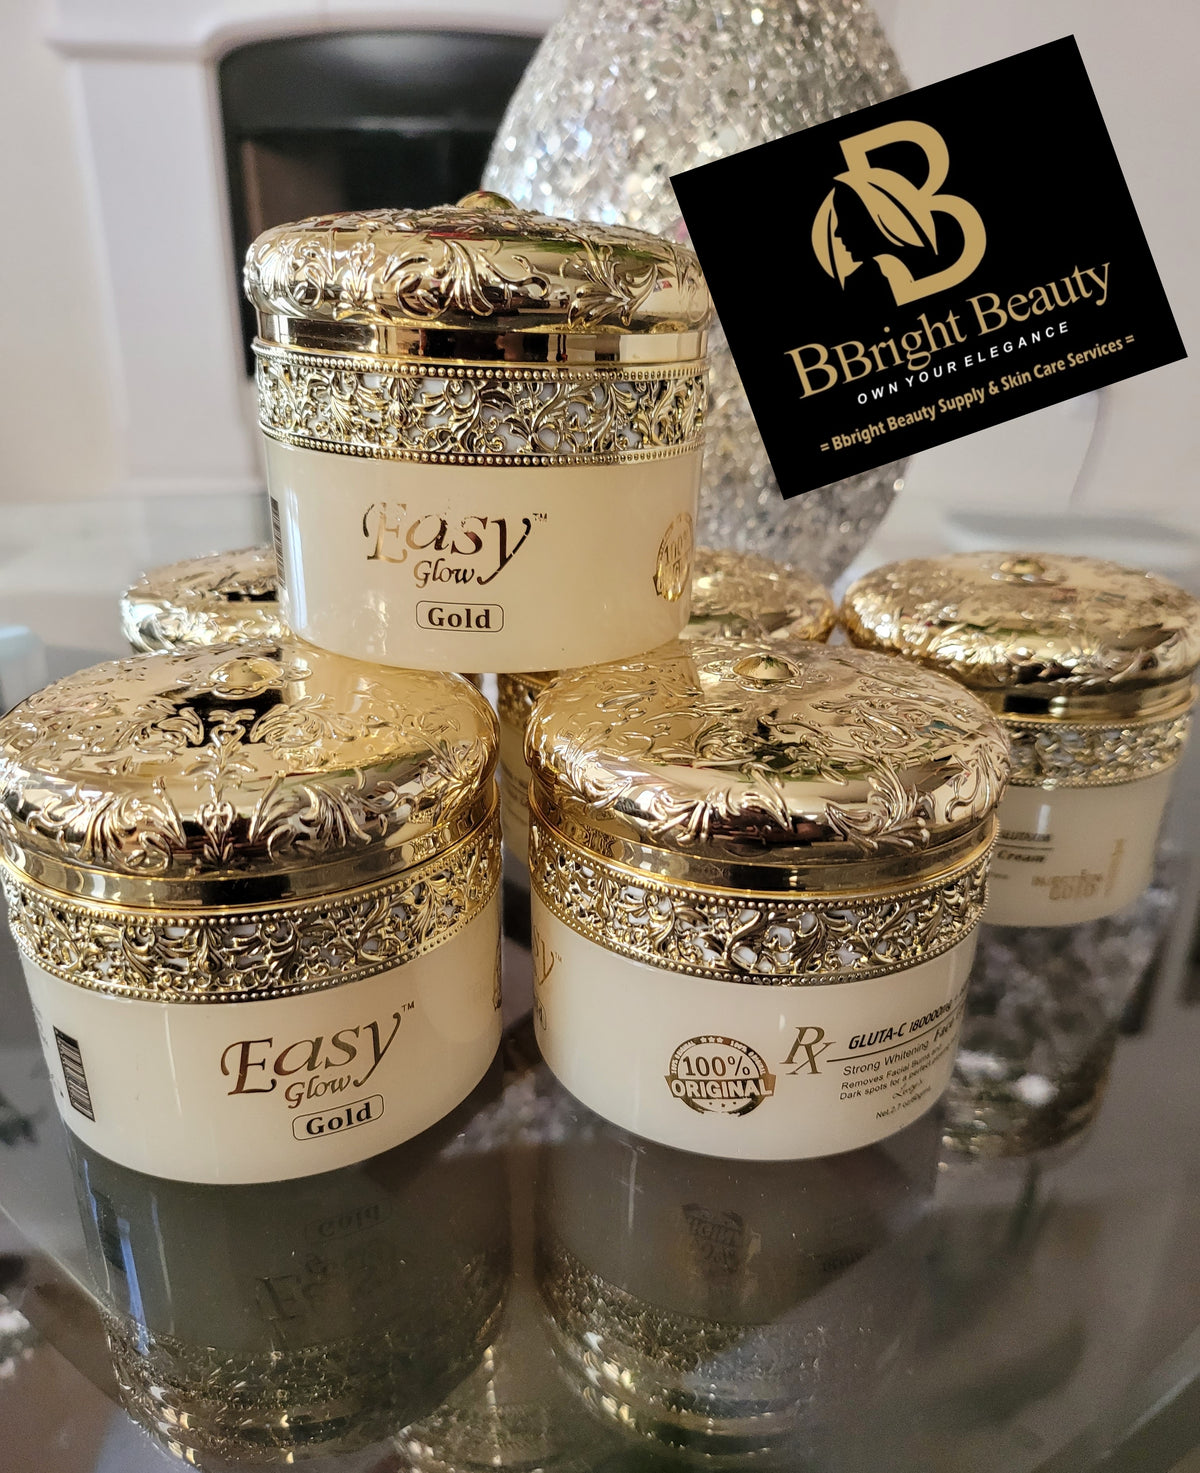 Easy Glow Gold Strong Brightening Face Cream